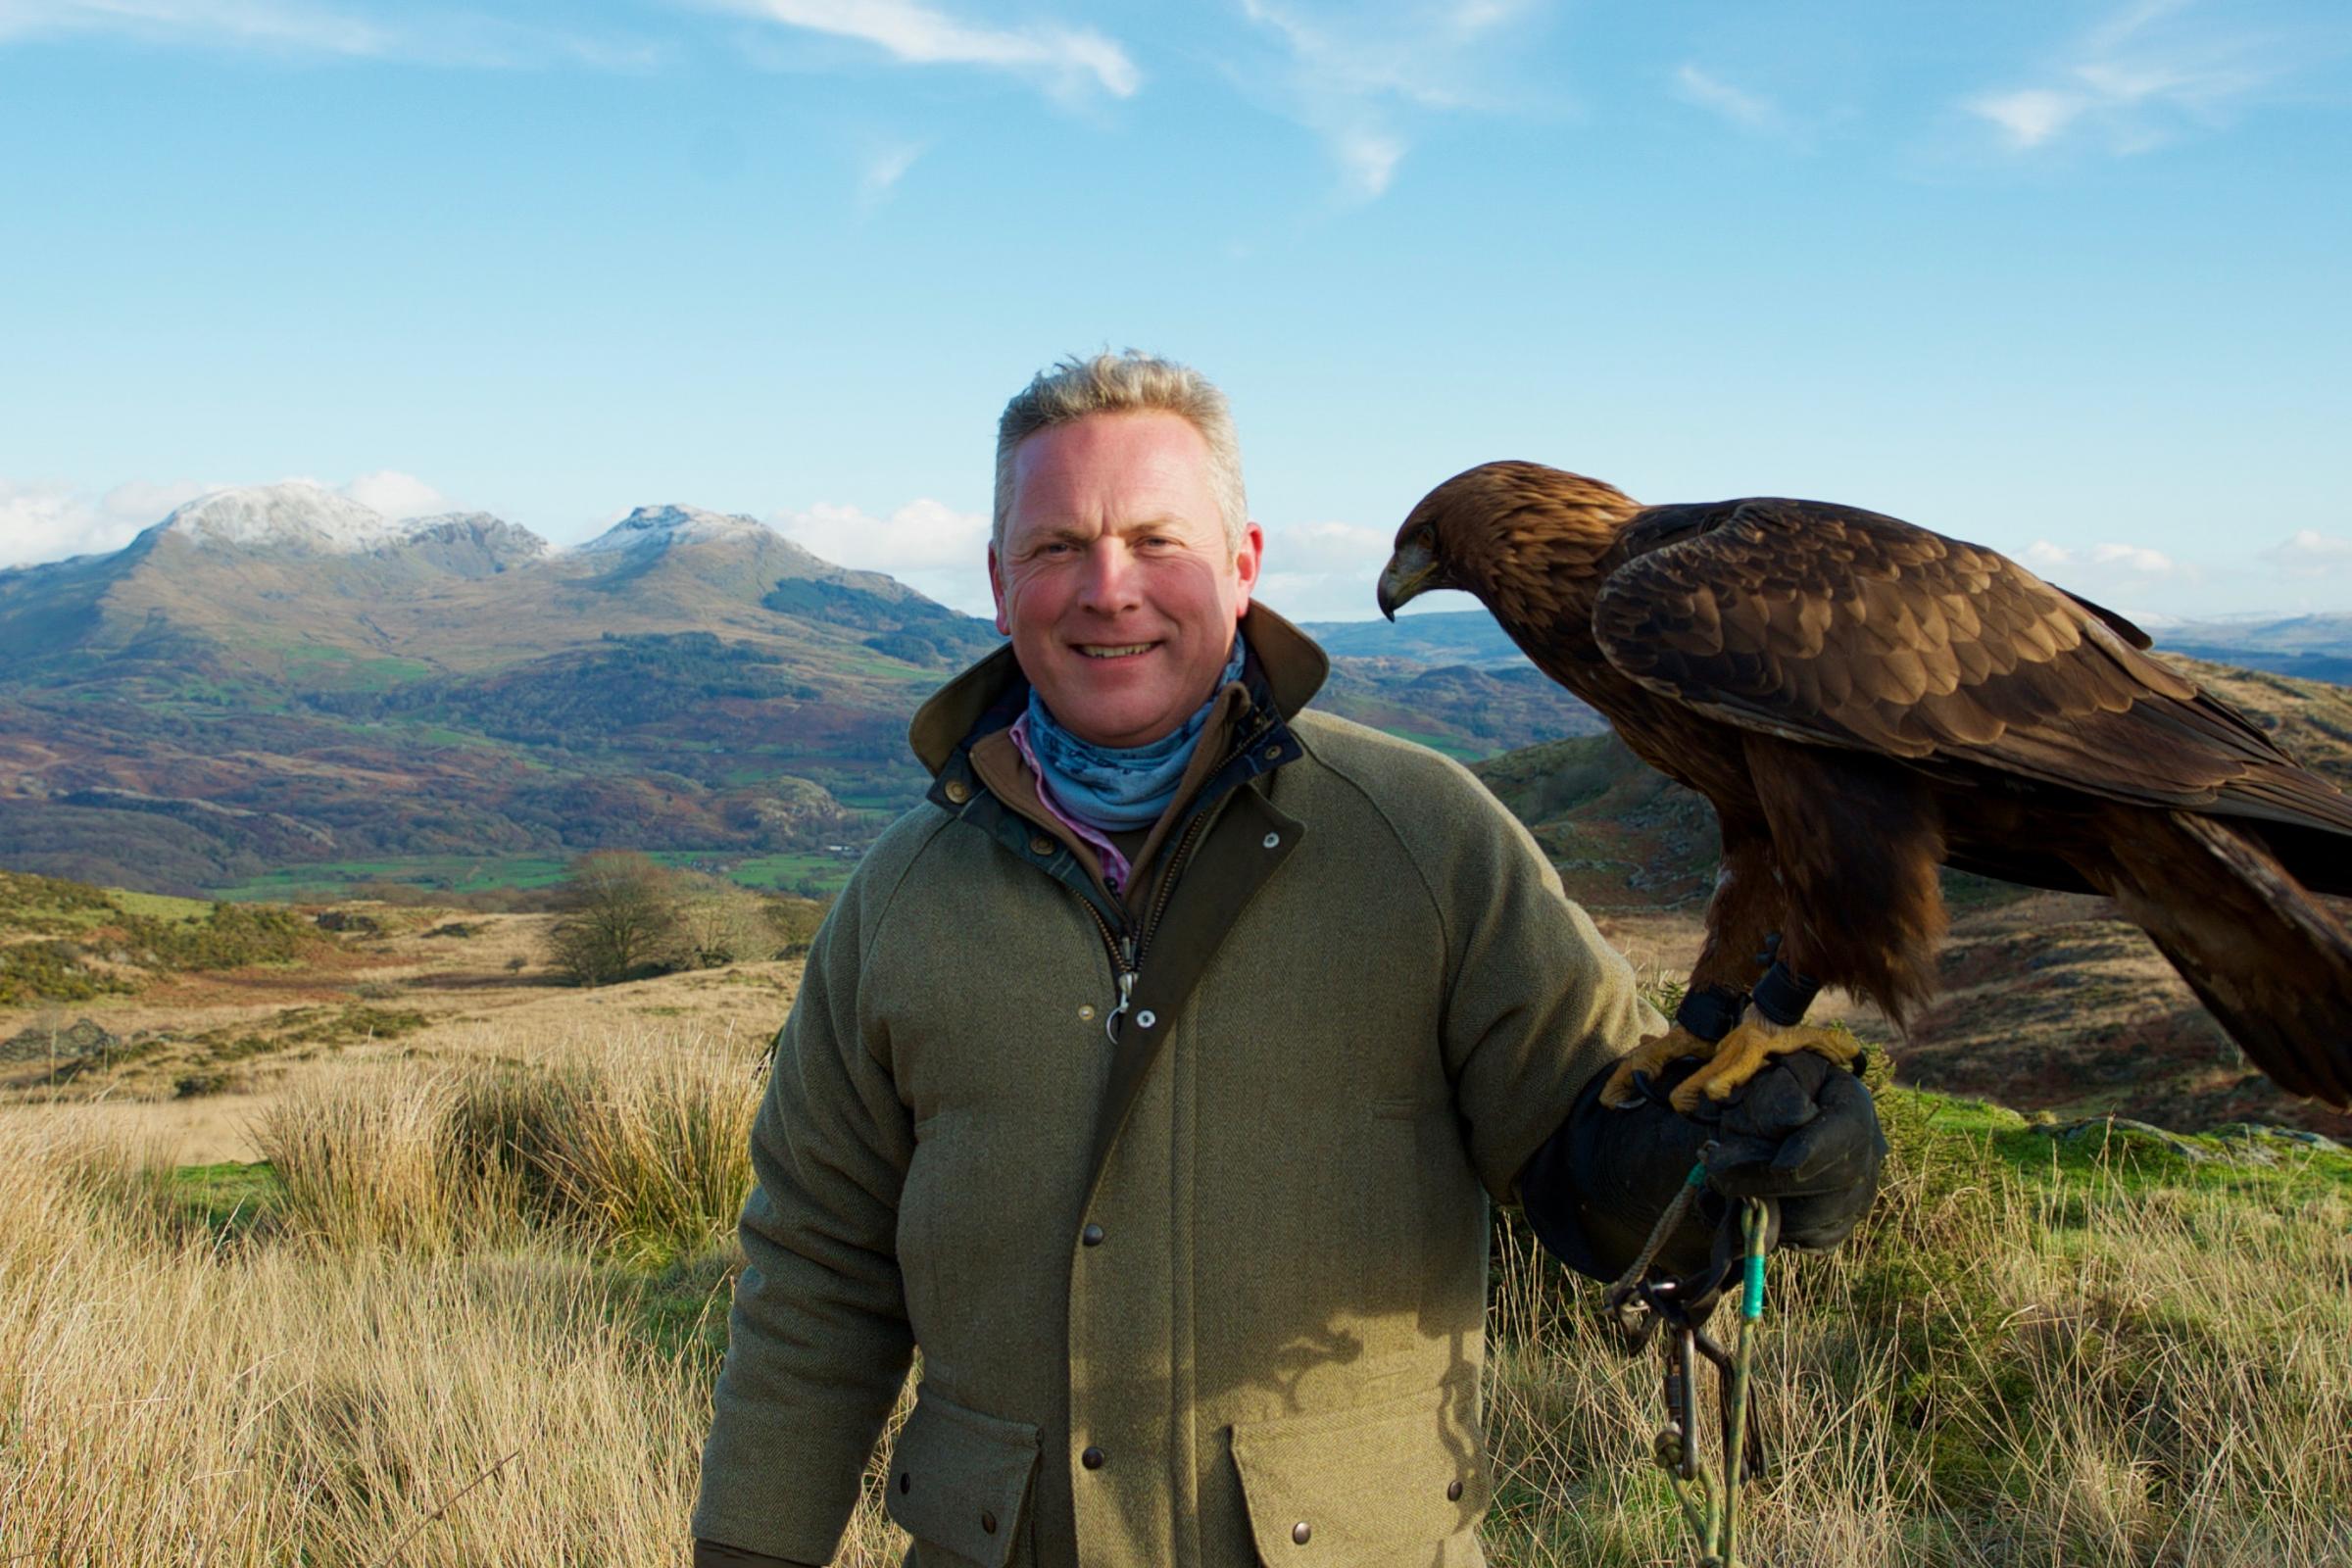 Countryfile will reveal plans to reintroduce golden eagles to Wales